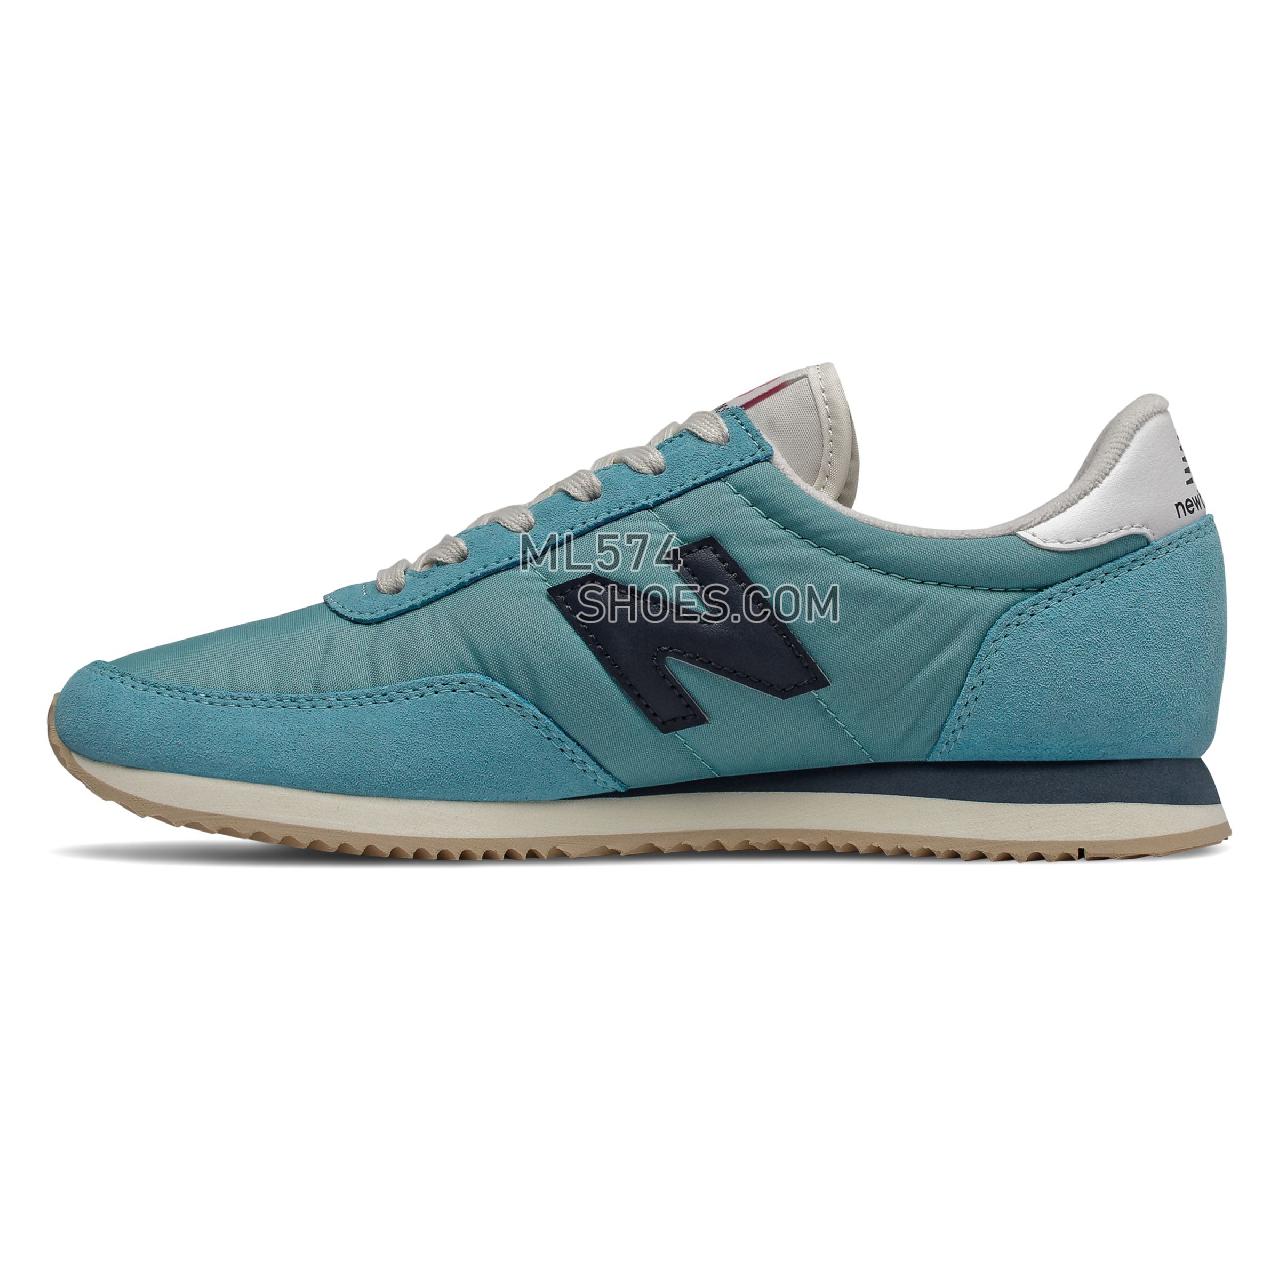 New Balance 720 - Women's 720 Classic - Wax Blue with Candy Pink - WL720BC